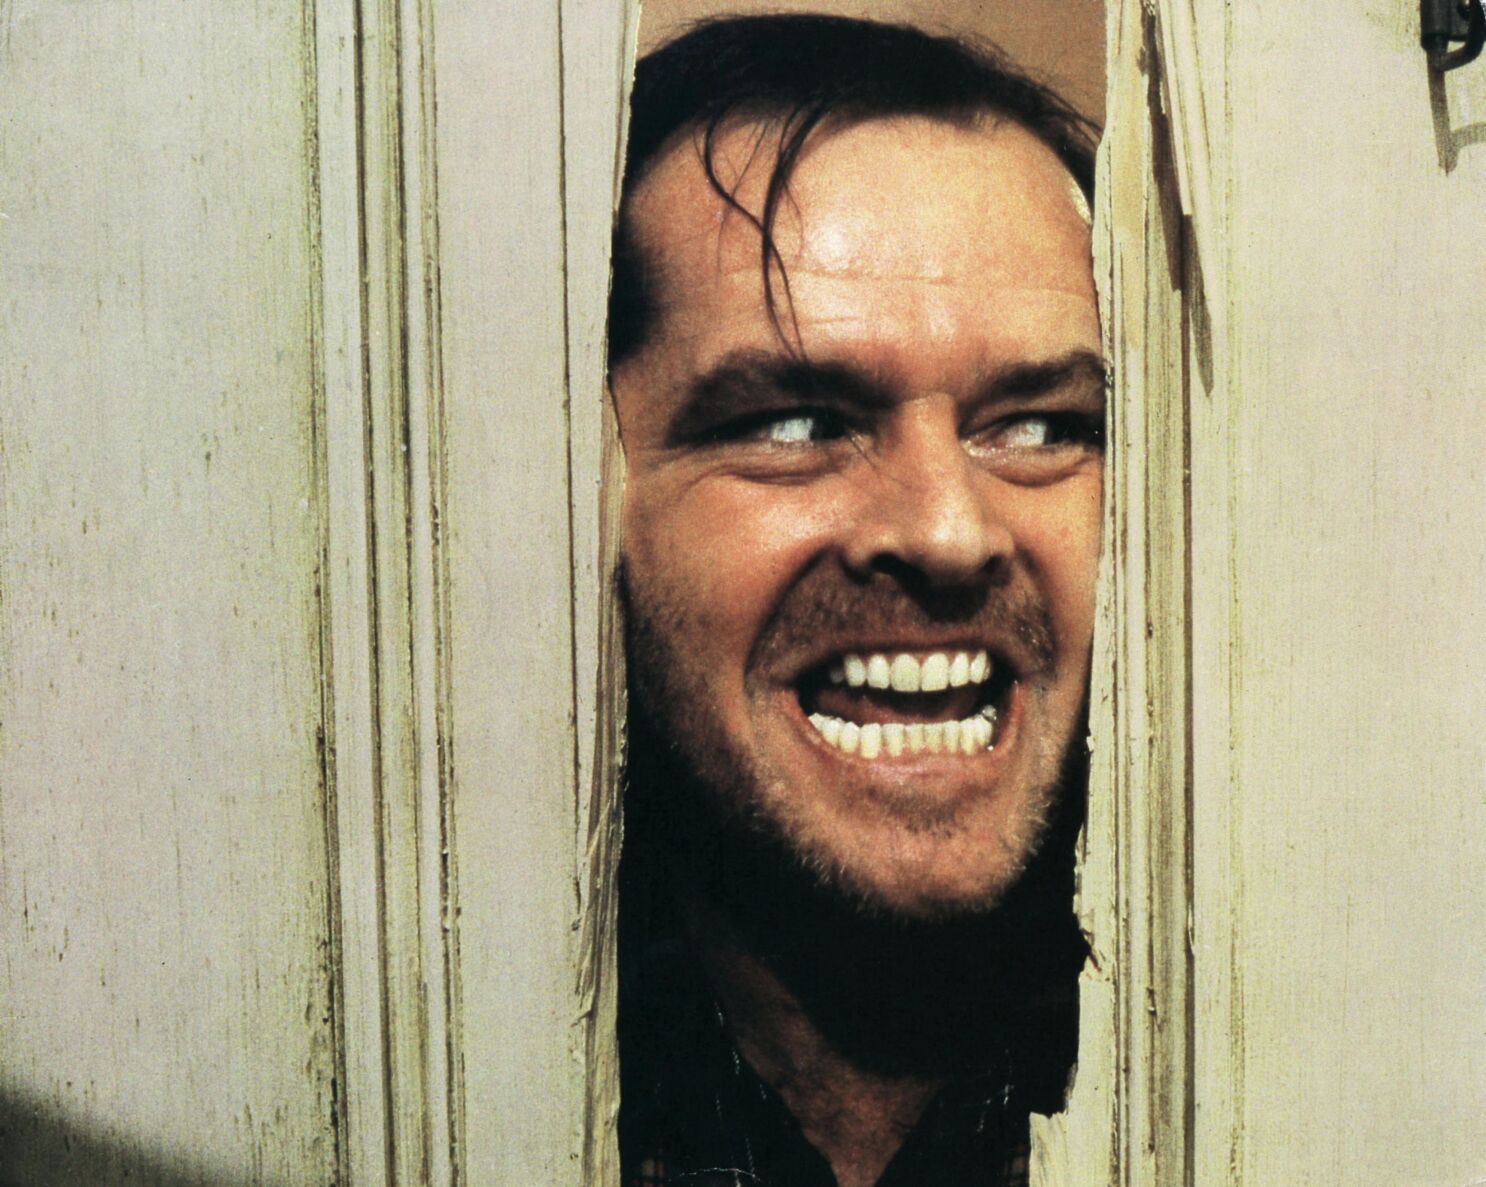 Parameters Exert Frill Movies on TV this week: 'The Shining'; 'Gandhi' and more - Los Angeles Times